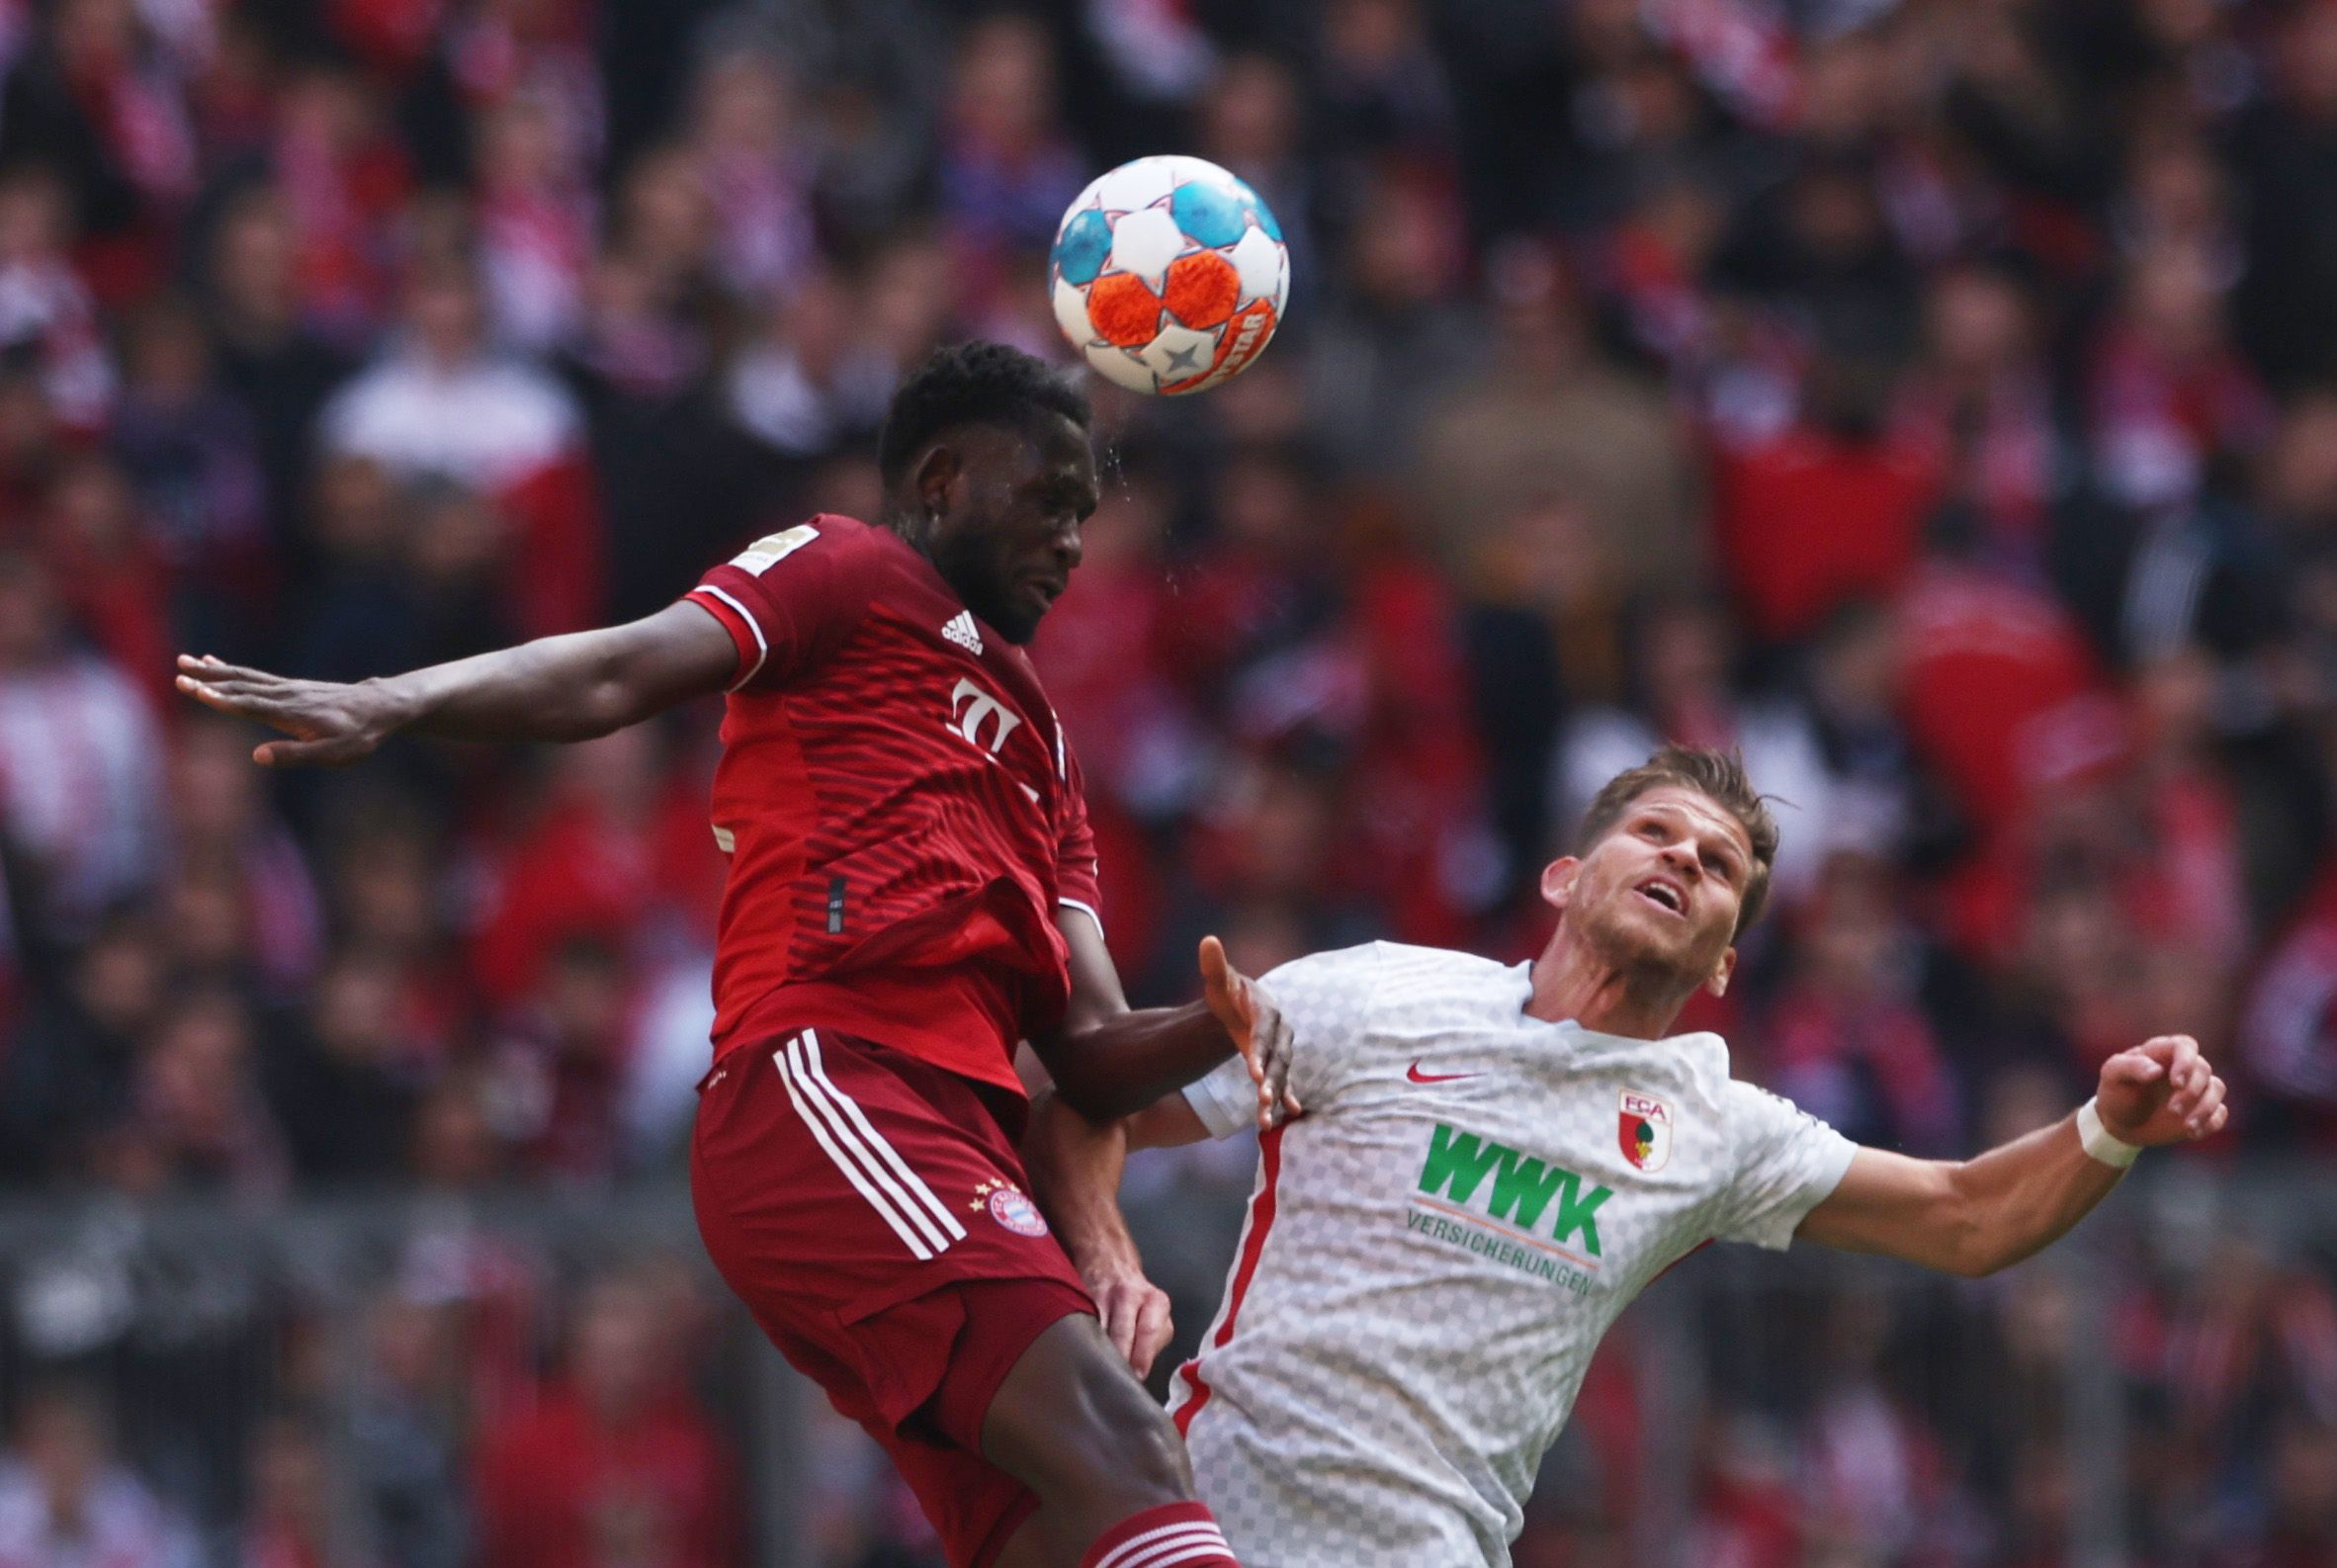 Nottingham Forest: New signing Omar Richards will miss first few weeks -Nottingham Forest News